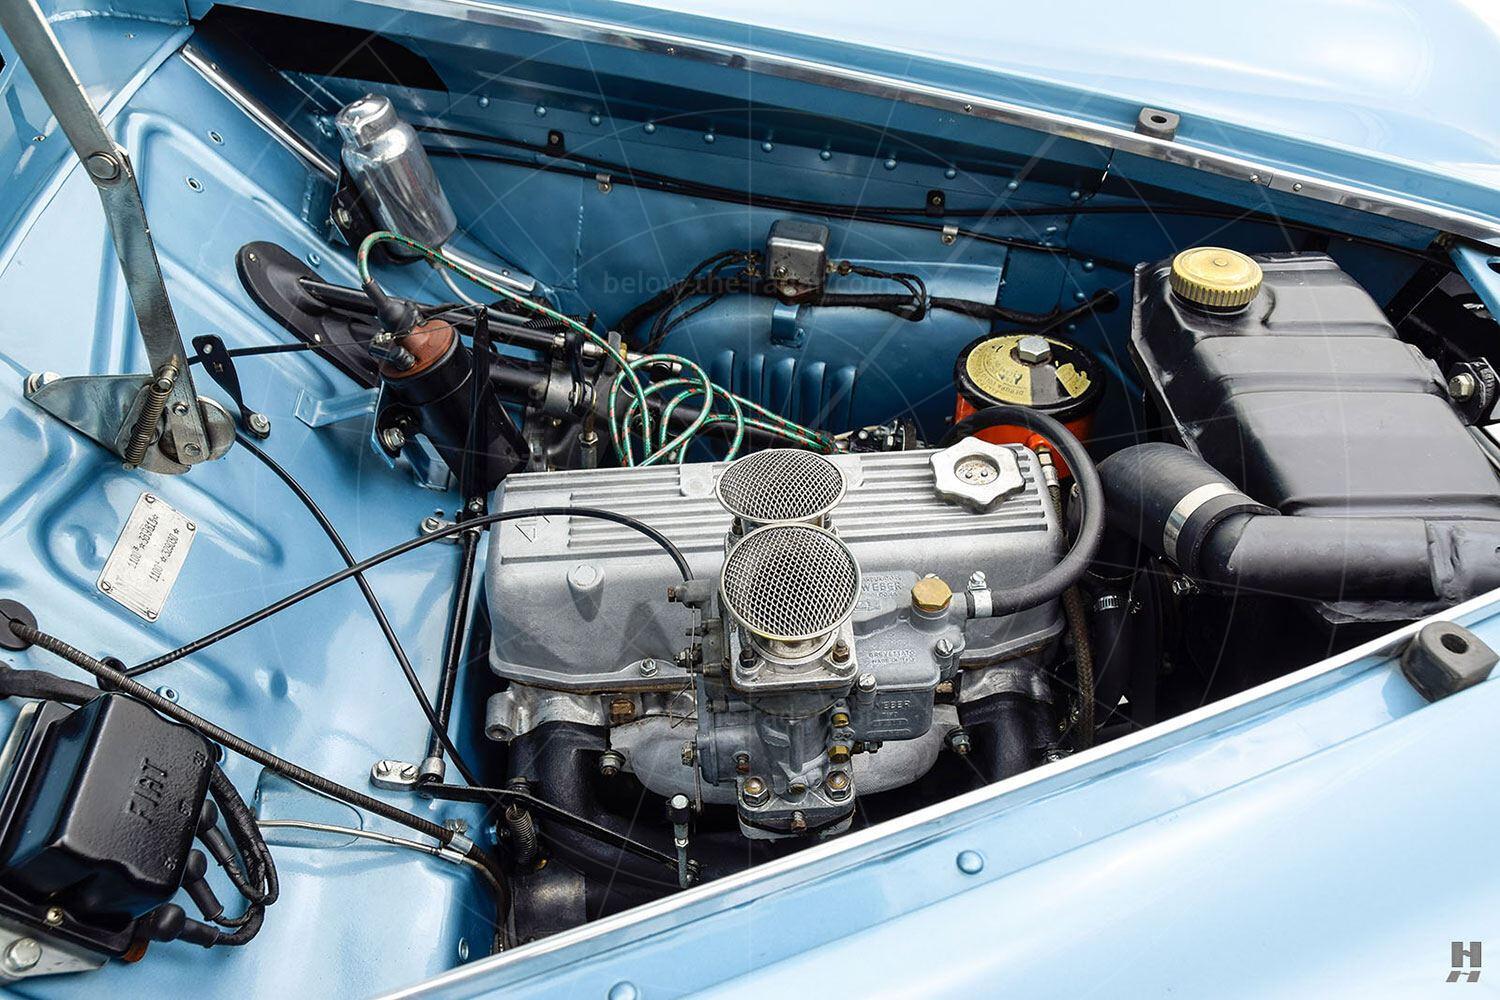 Fiat 1100 cabriolet by Pinin Farina - engine bay Pic: Hyman Ltd | Fiat 1100 cabriolet by Pinin Farina - engine bay